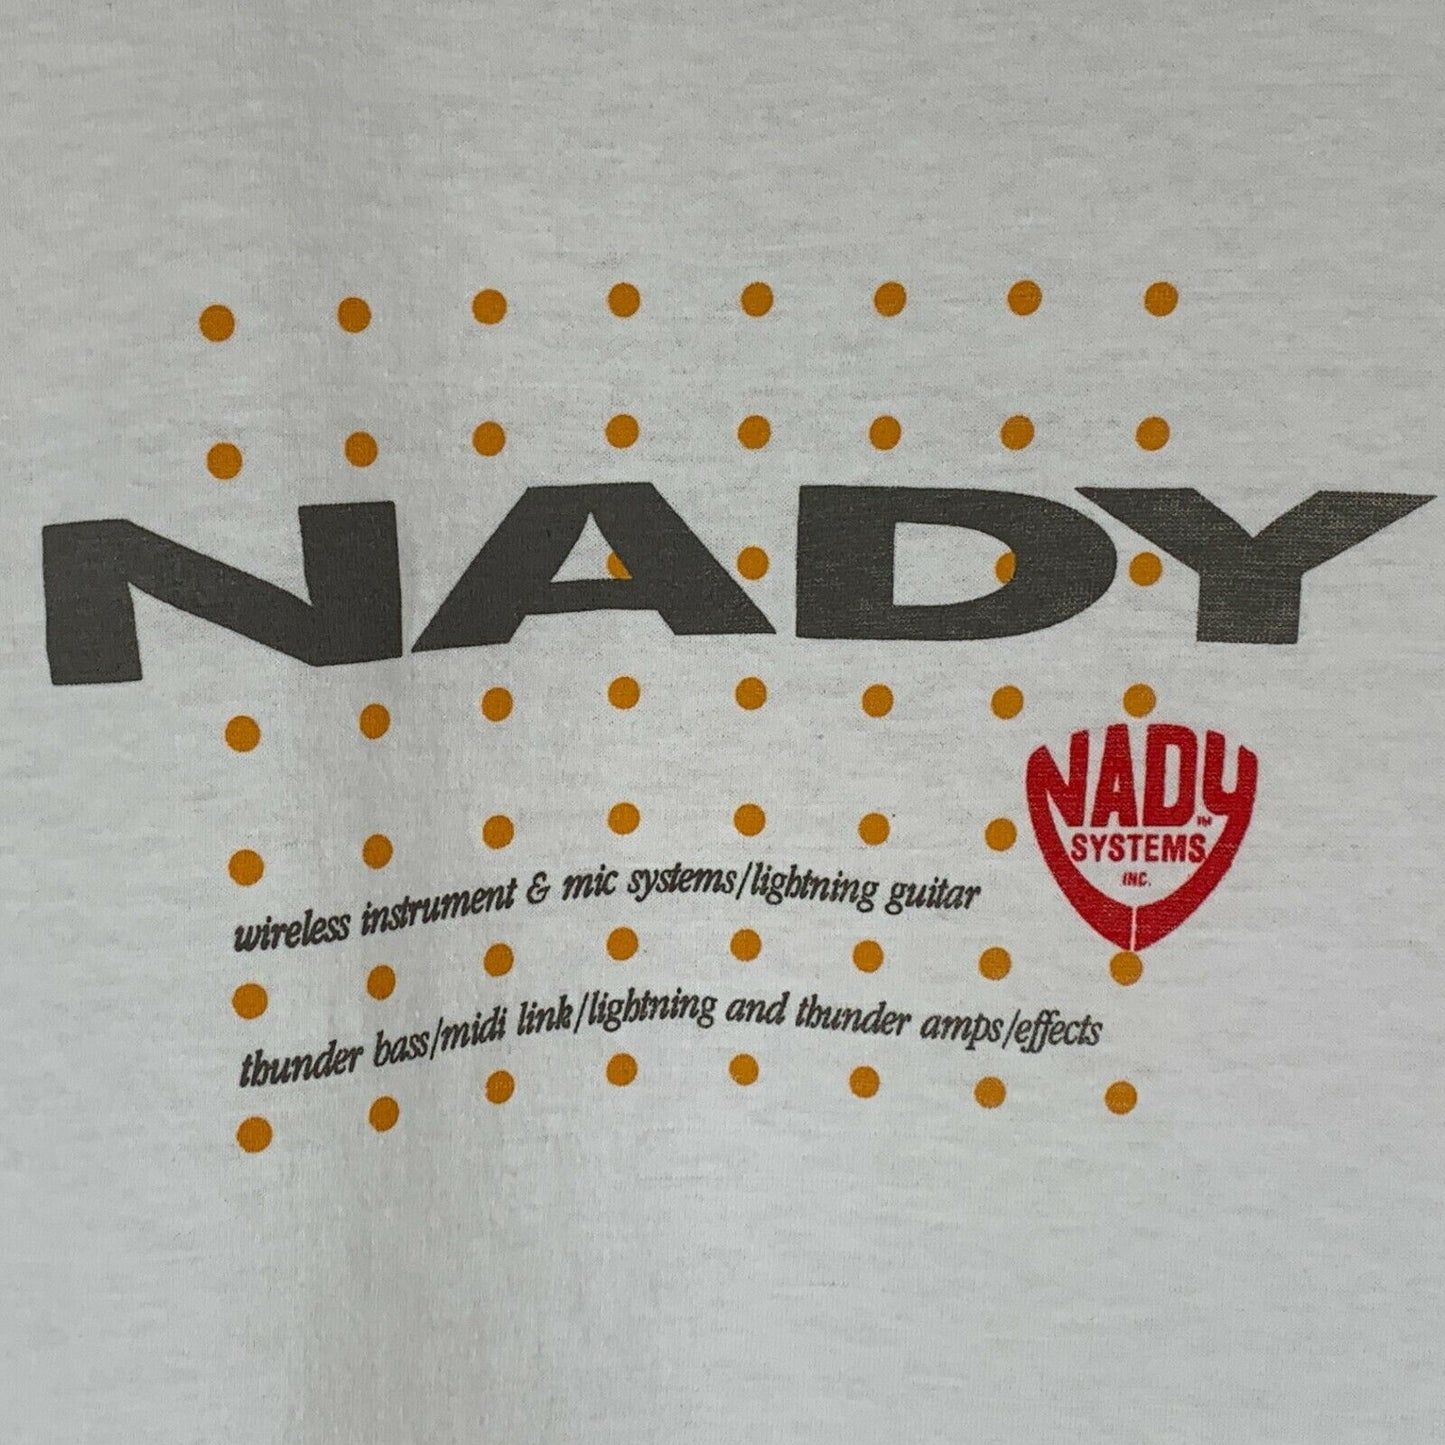 NADY Systems Vintage 80s T Shirt Bass Guitar Amp Microphone Rap Rock Tee Small